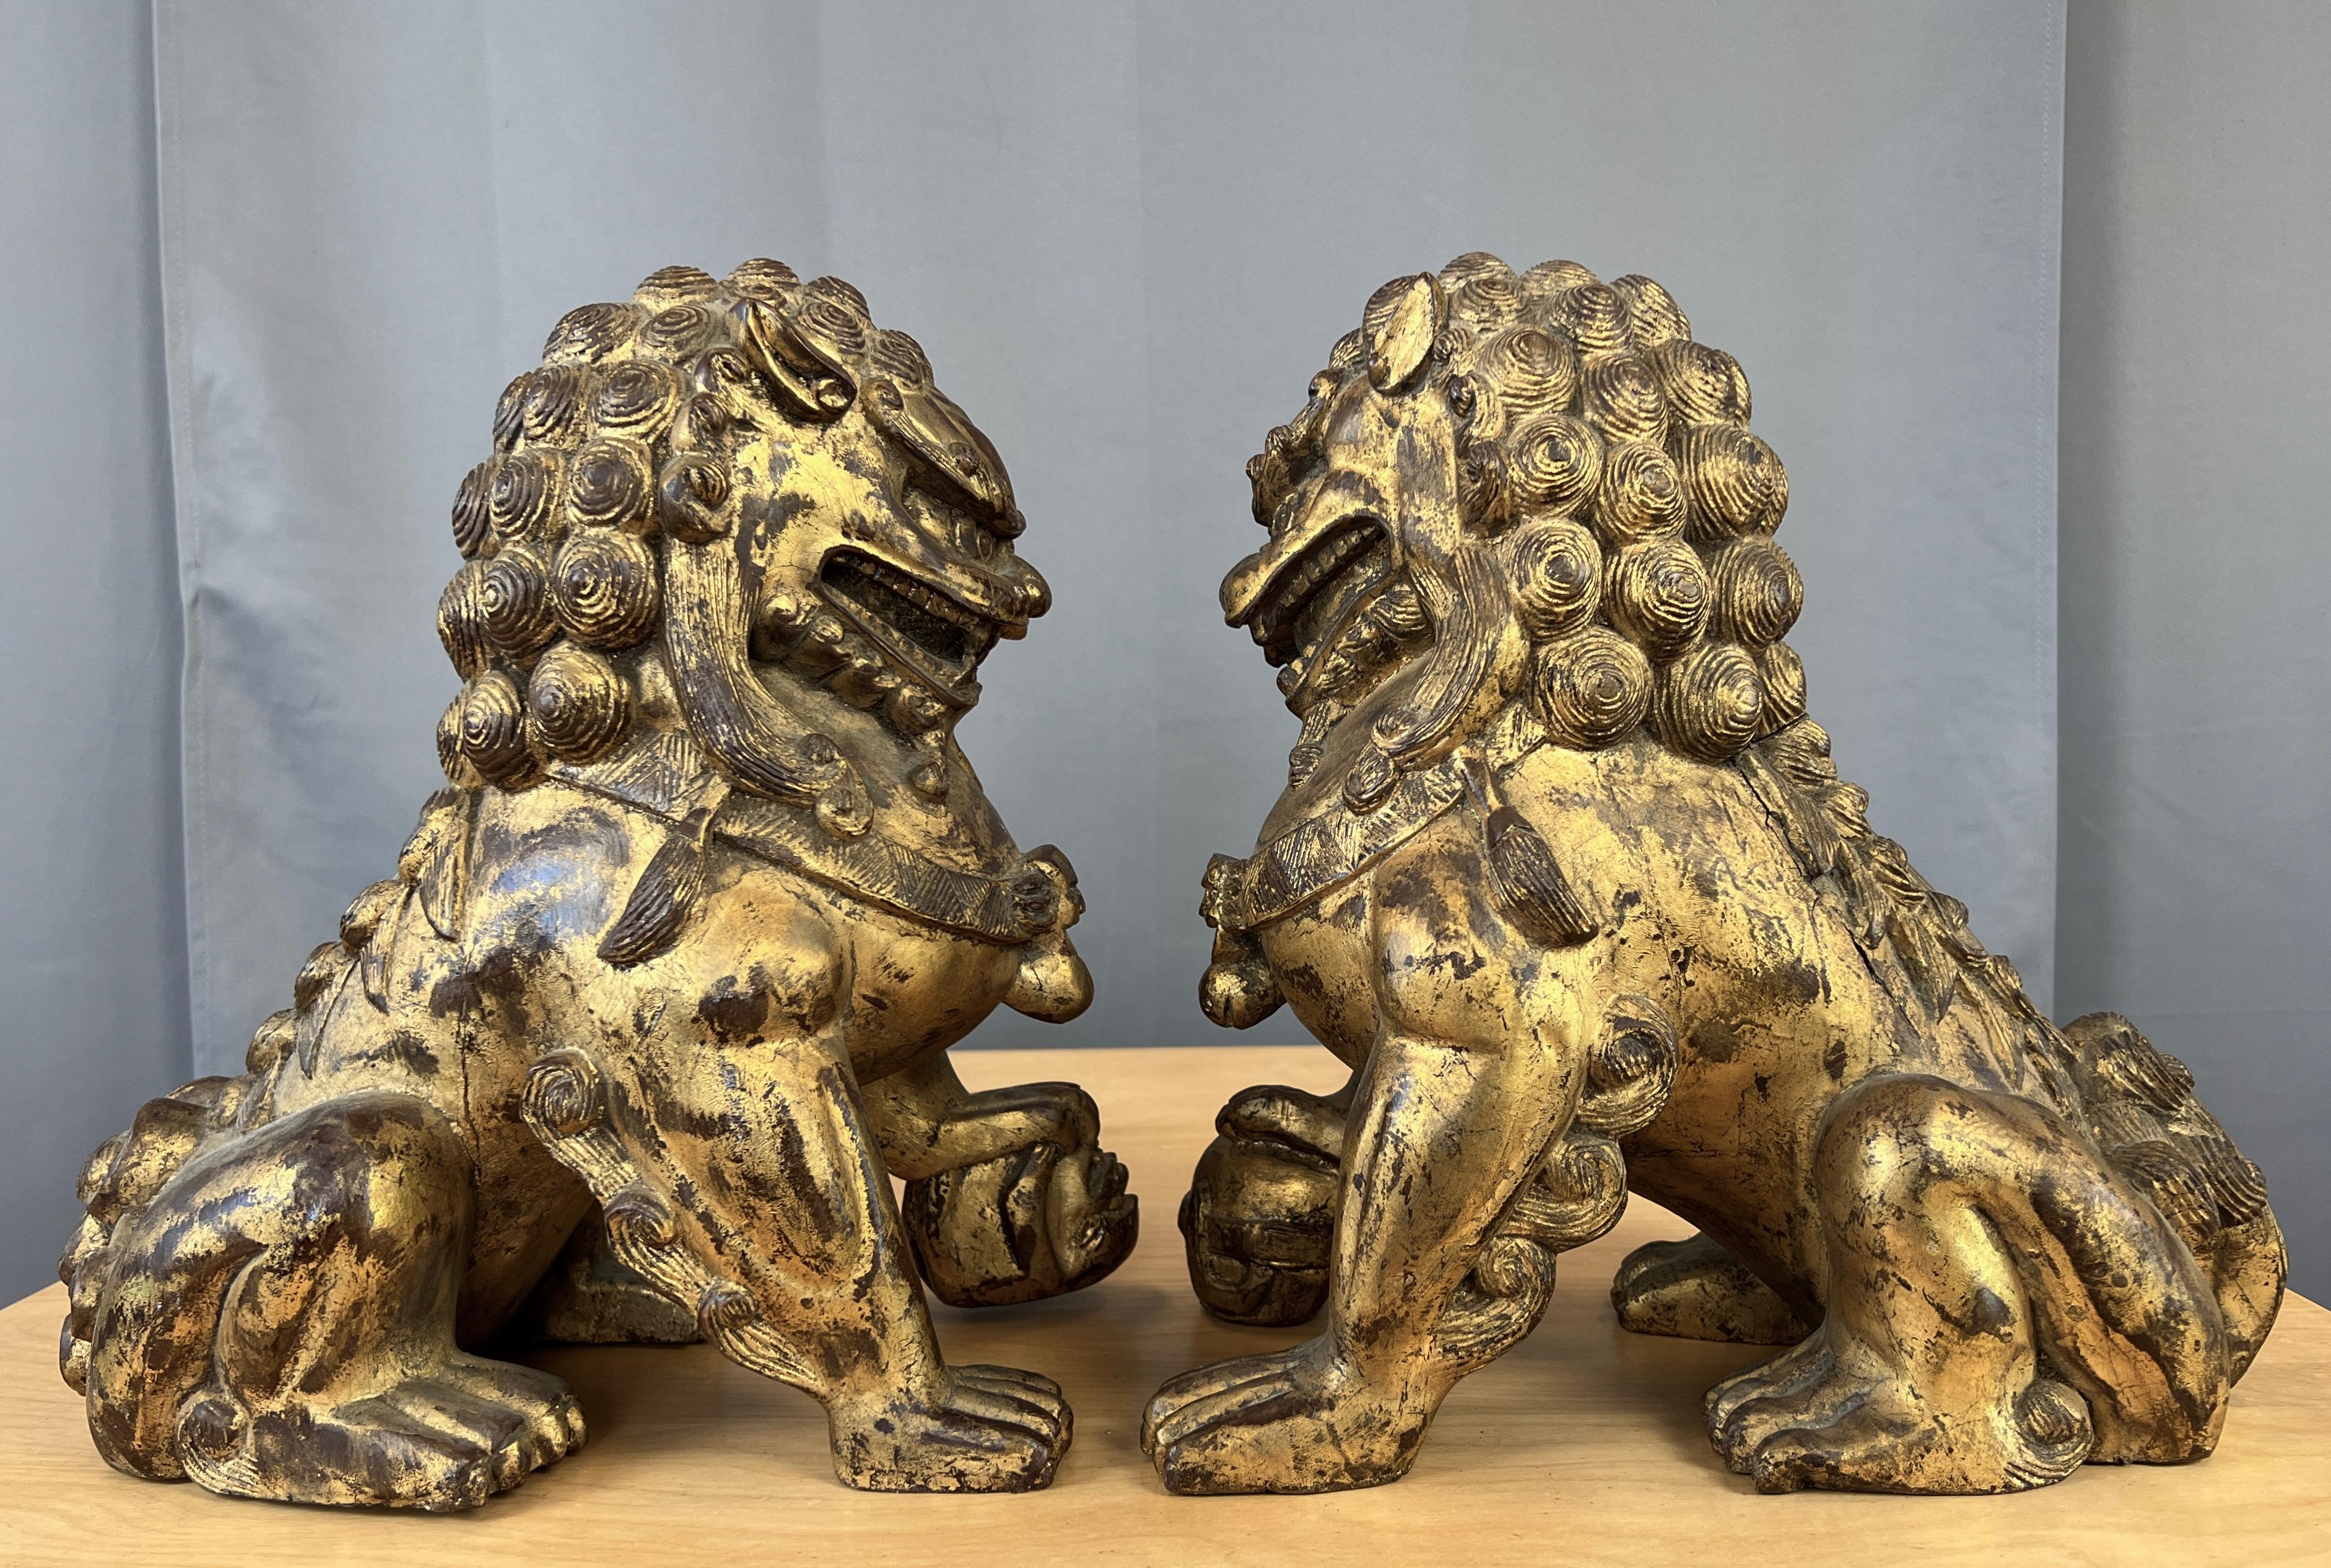 Chinese Export Vintage Pair Chinese Gilt Carved Wood Foo Dog / Guardian Lions Figurines For Sale